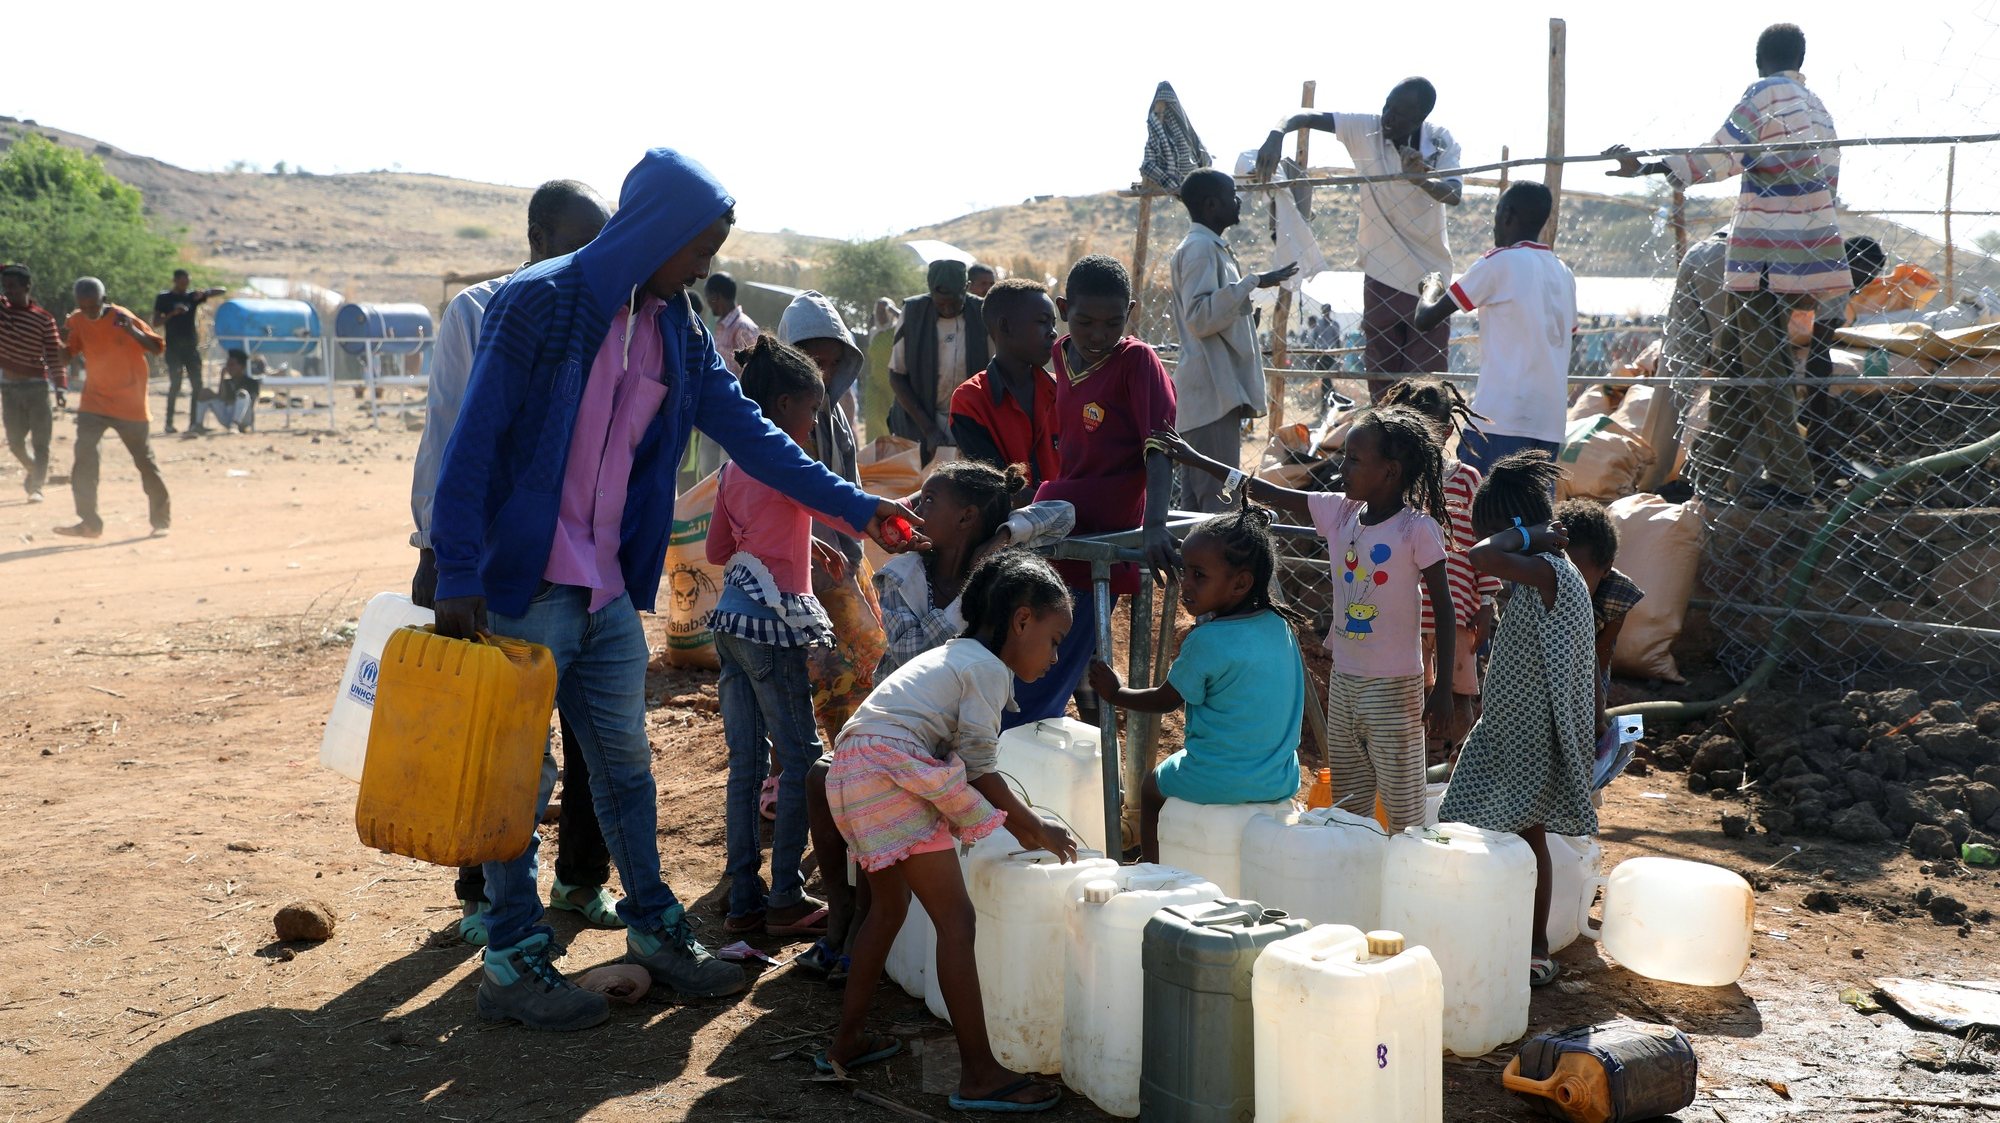 epa08849887 Children collect water at Um Rakuba refugee camp in the state of al-Qadarif (also known as Gedaref), Sudan, 28 November 2020. The number of refugees in this camp reached nearly 10,000 refugees who crossed the border from Ethiopia to Sudan to escape the conflict in Tigray region of Ethiopia.  EPA/MOHAMMED ABU OBAID